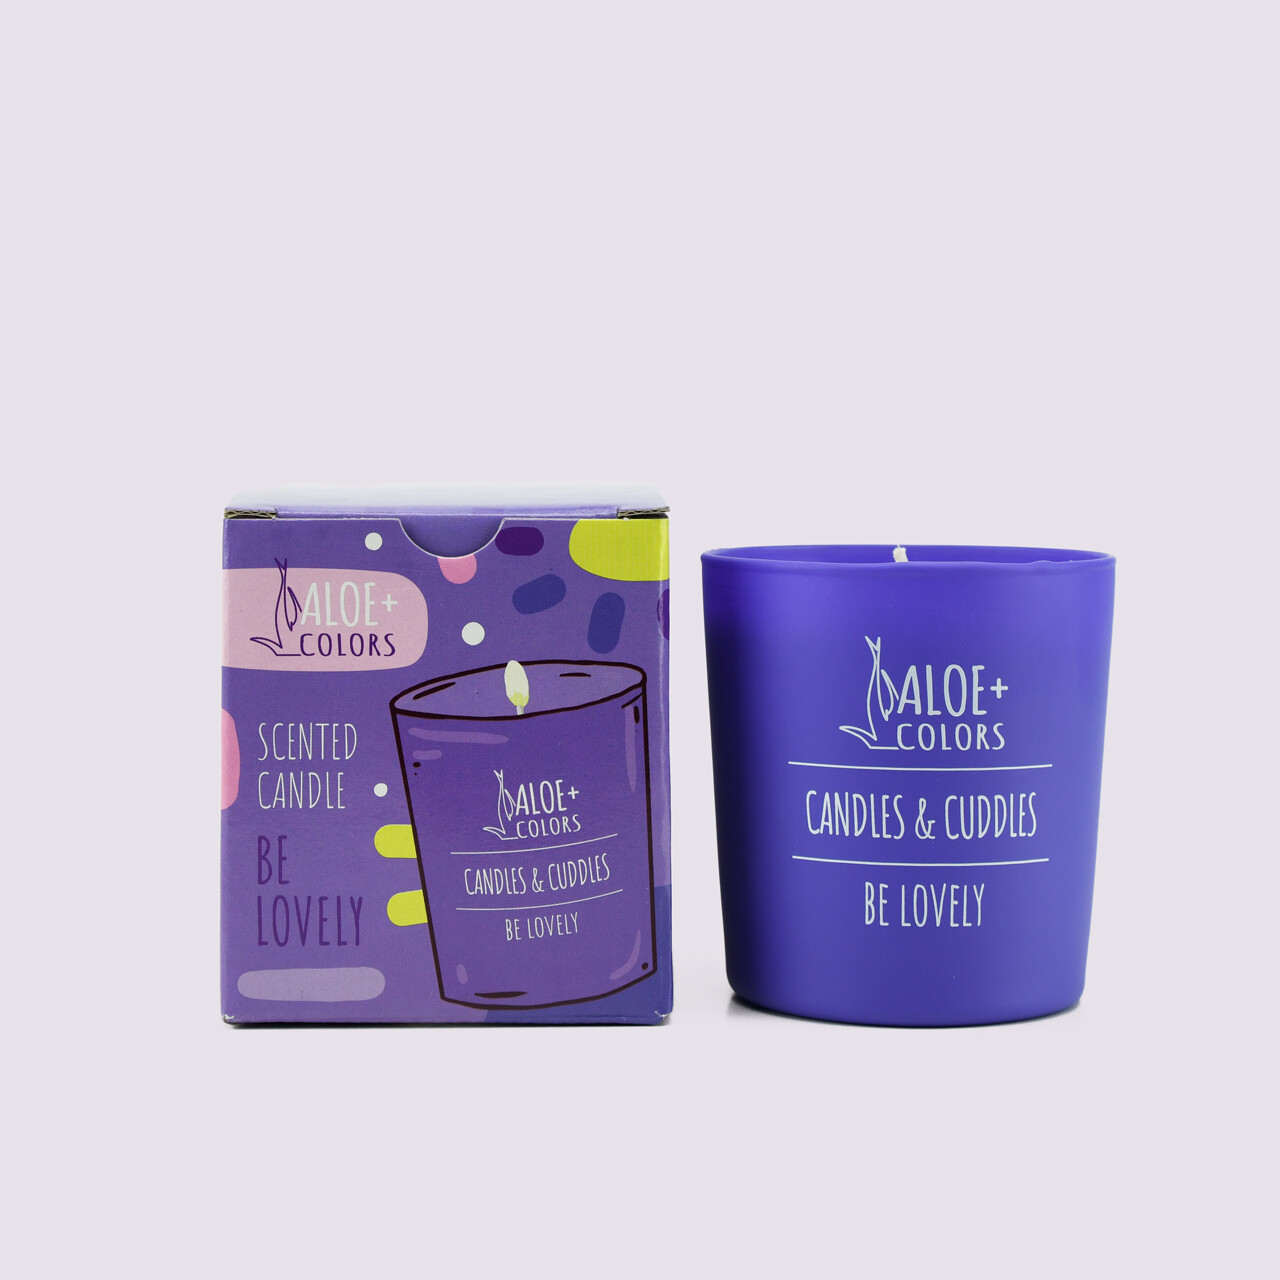 Aloe+Colors Scented Soy Candle Be Lovely